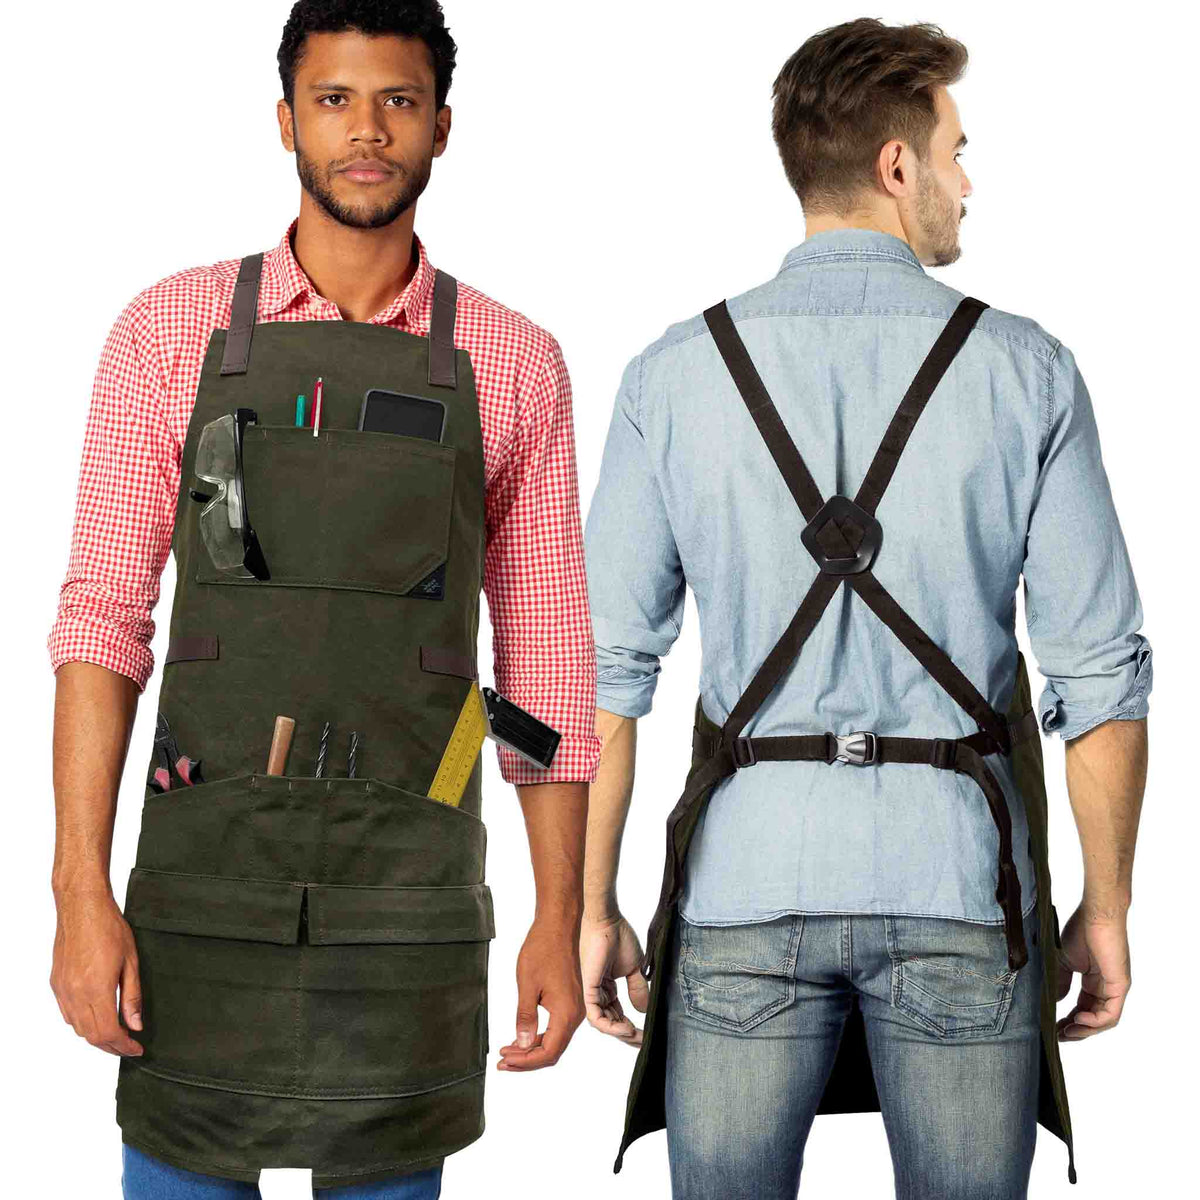 WoodWork Apron Front and Back